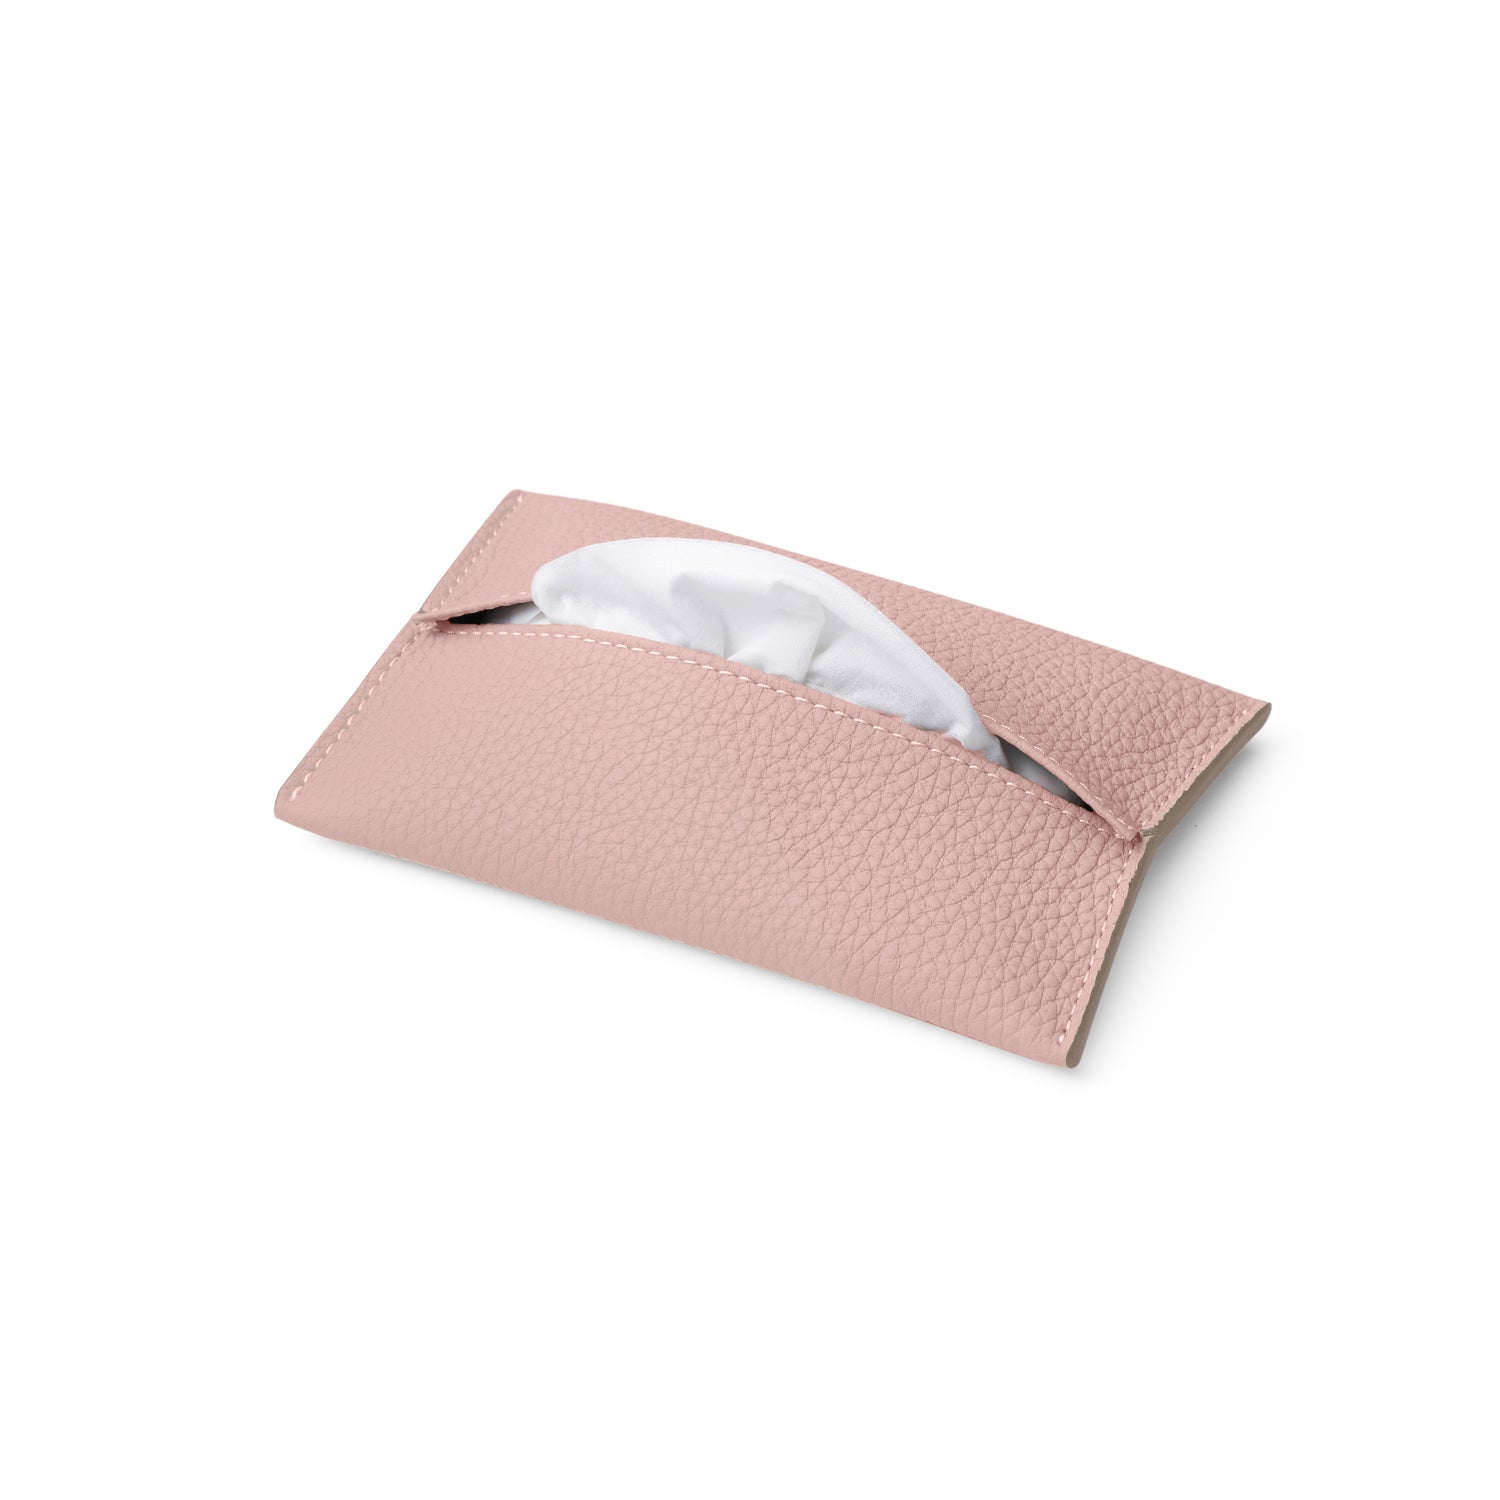 Tissue case in shrink leather